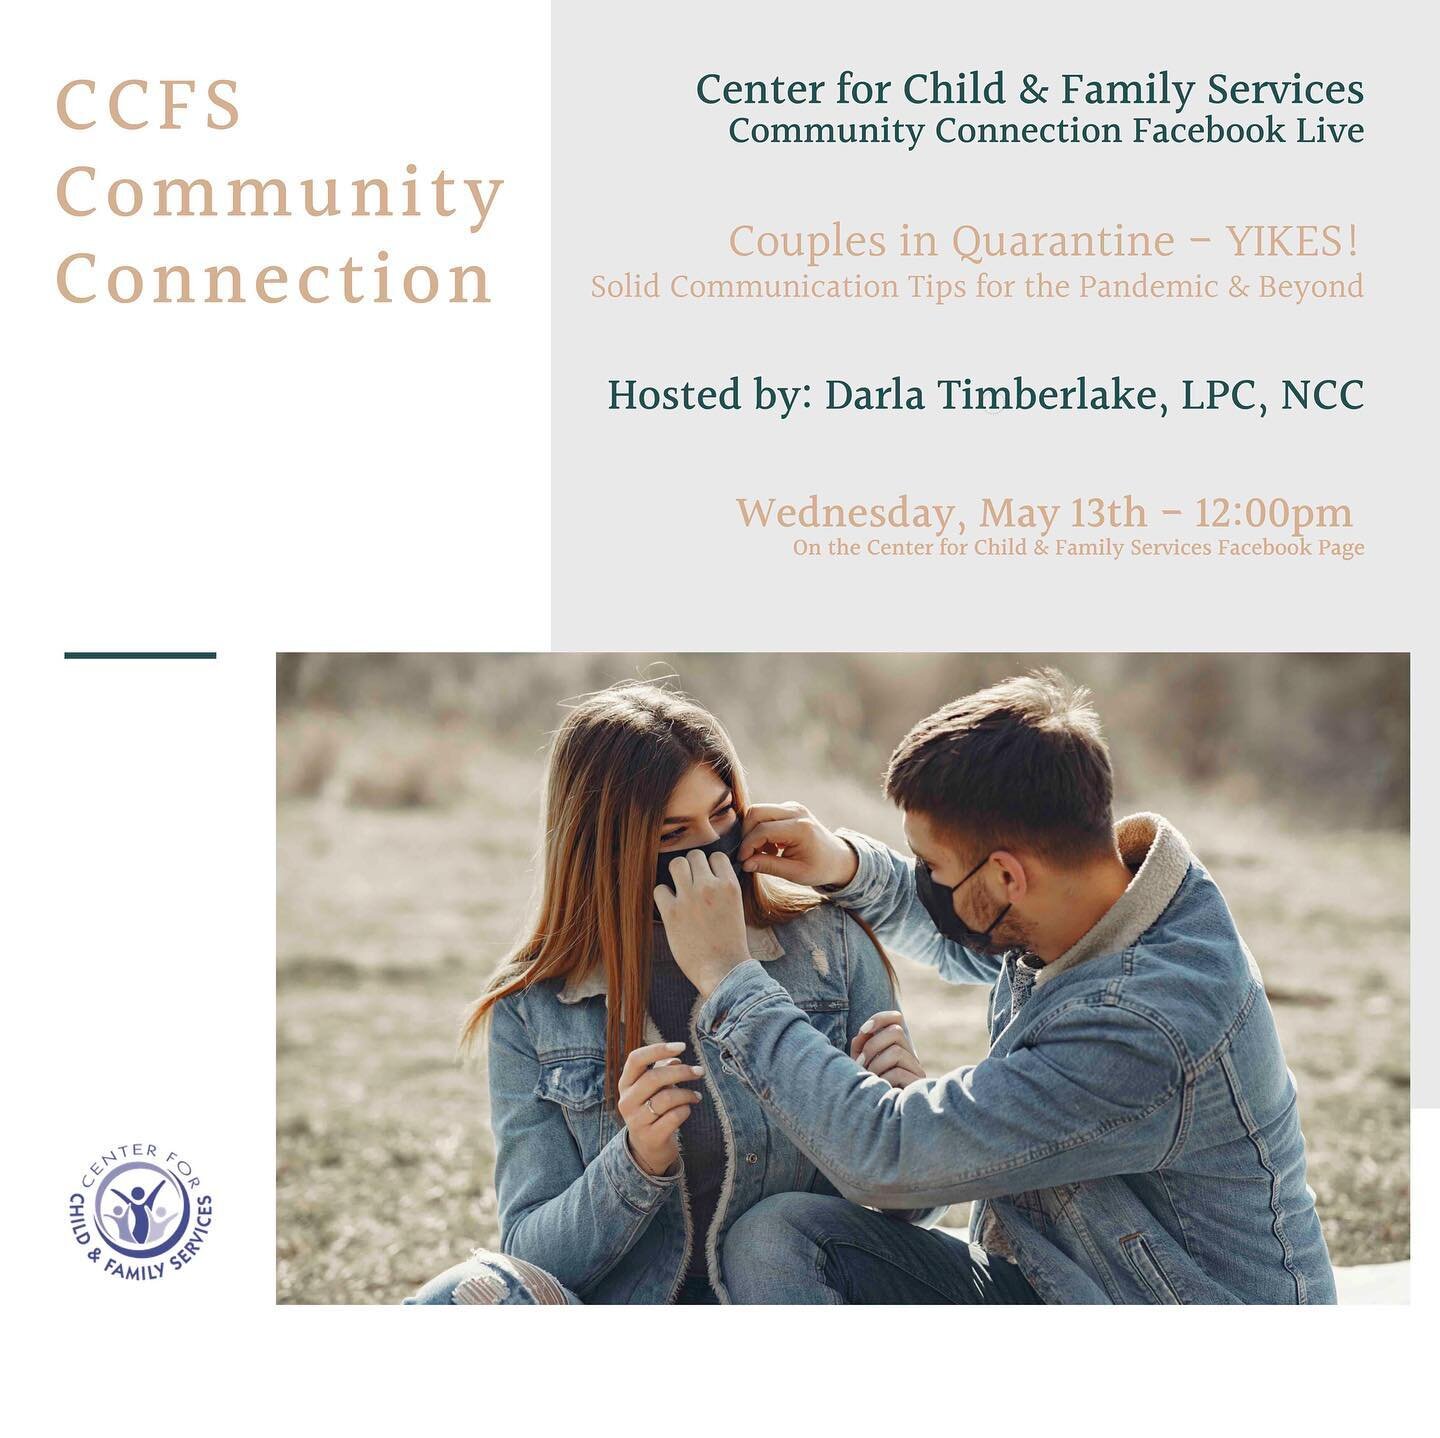 Couples in Quarantine - YIKES! Solid Communication Tips for the Pandemic &amp; Beyond.
CCFS Weekly Wednesday Facebook Live tomorrow, Wednesday, May 13th at 12:00pm!
Hosted by CCFS' own Darla Timberlake, LPC, NCC.
Tune in tomorrow on the Center for Ch